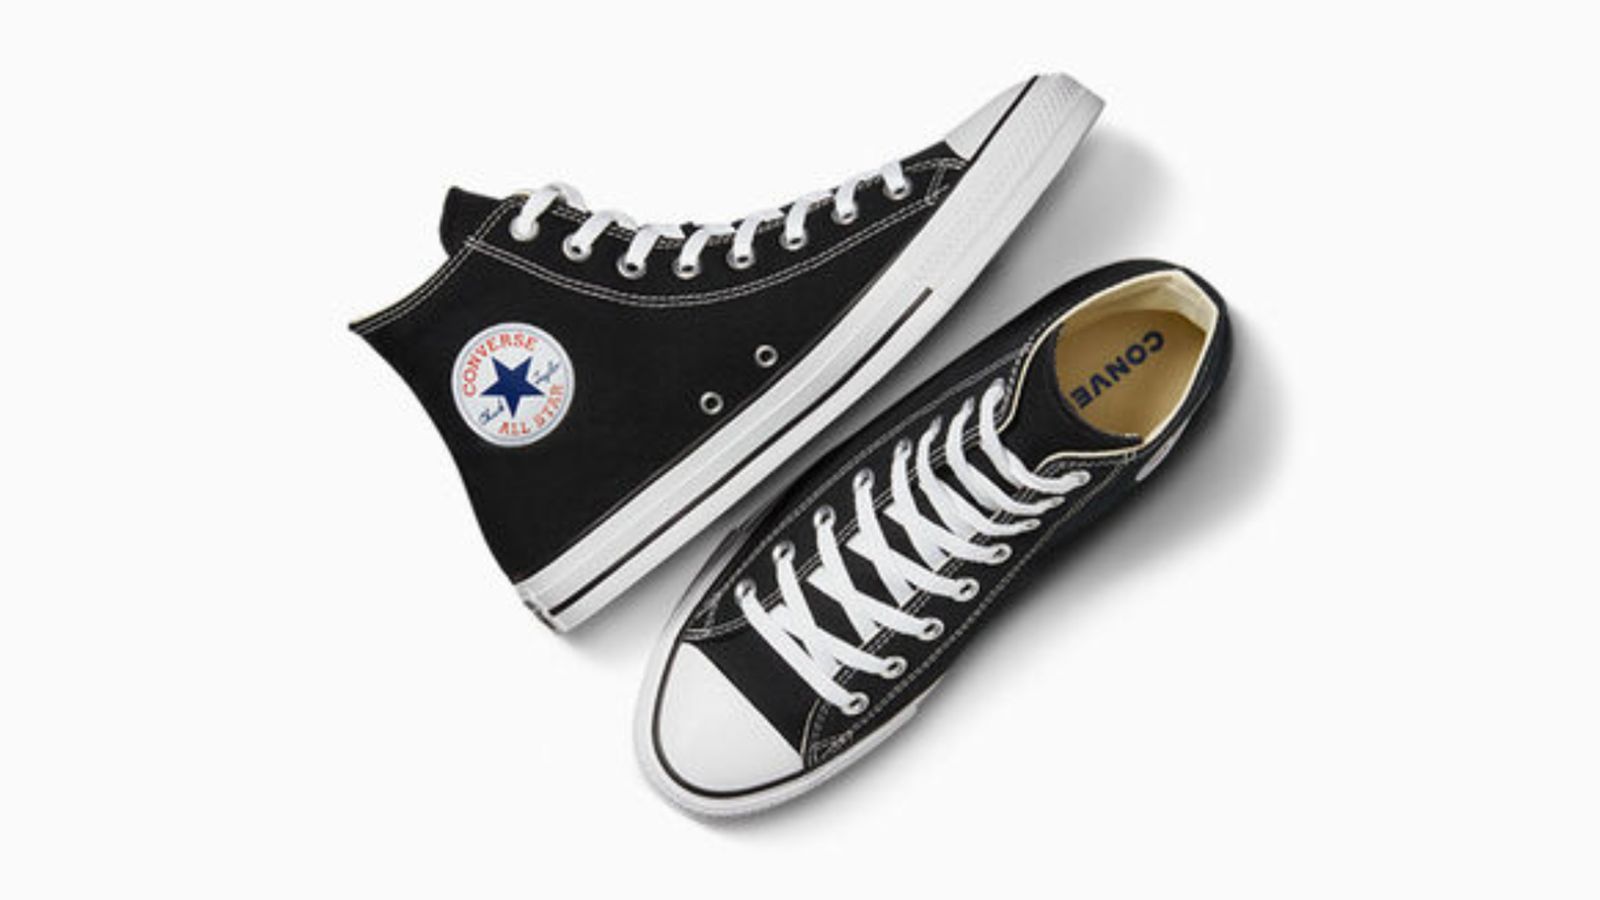 Converse product image of a pair of black high-top Chuck Taylor All Stars with white details and laces and All Star branding in blue and white.